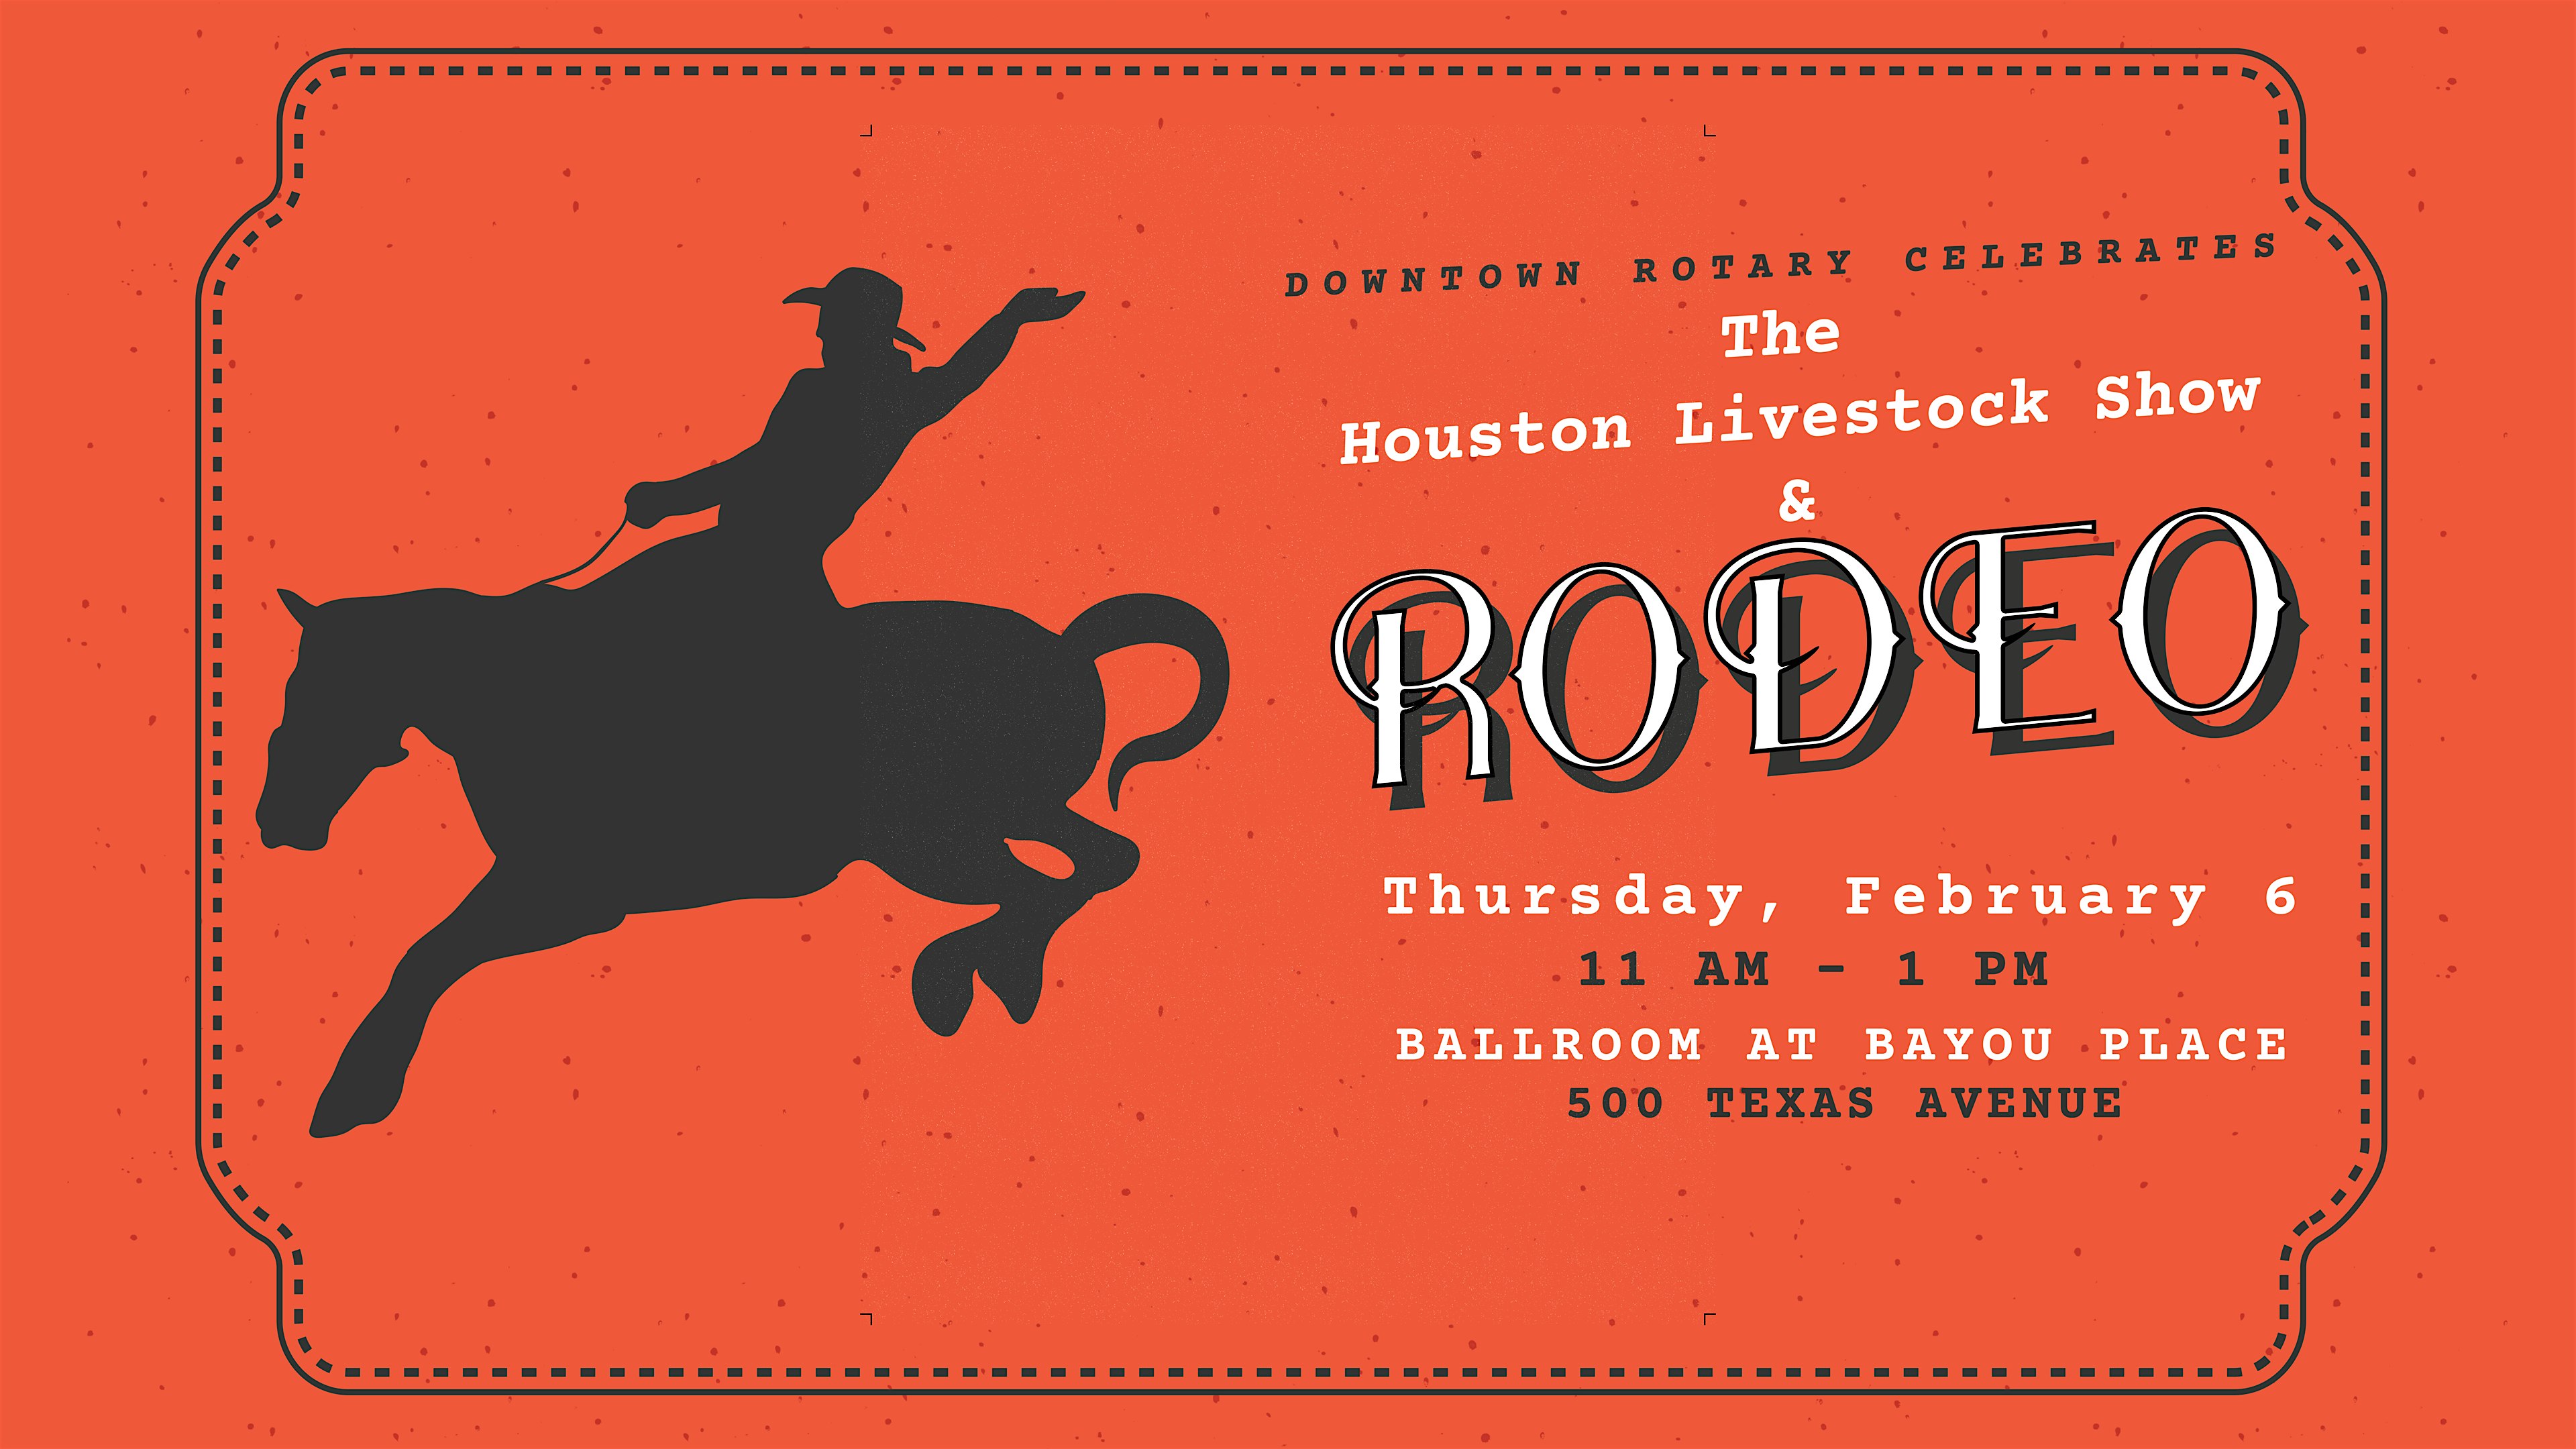 Downtown Rotary Celebrates the Houston Livestock Show and Rodeo 2020